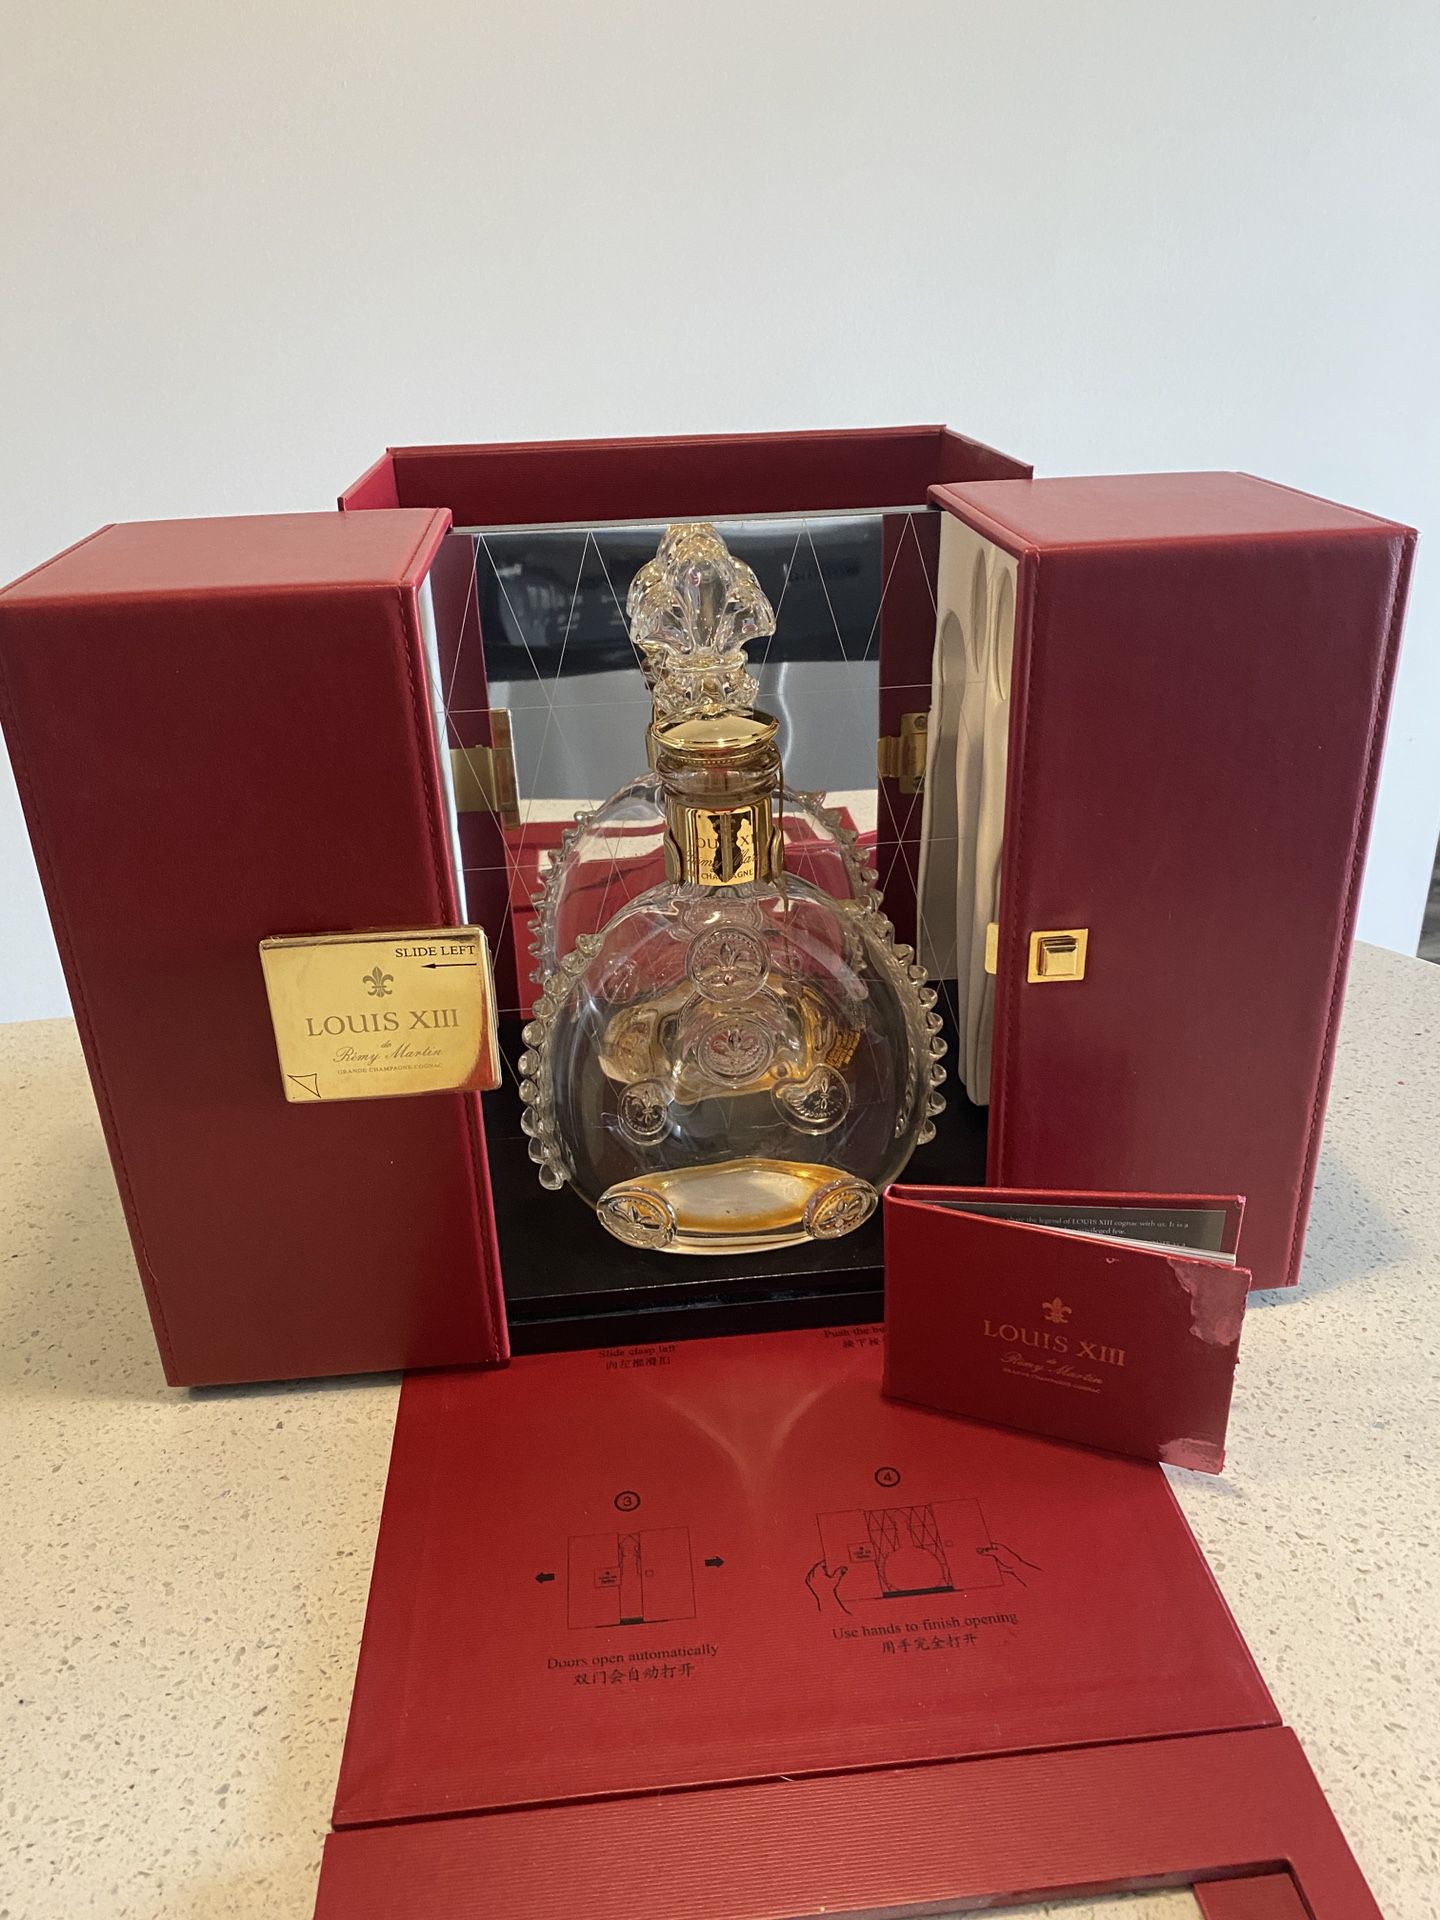 REMY MARTIN LOUIS XIII COGNAC BACCARAT CRYSTAL DECANTER BOTTLE EMPTY with  BOX